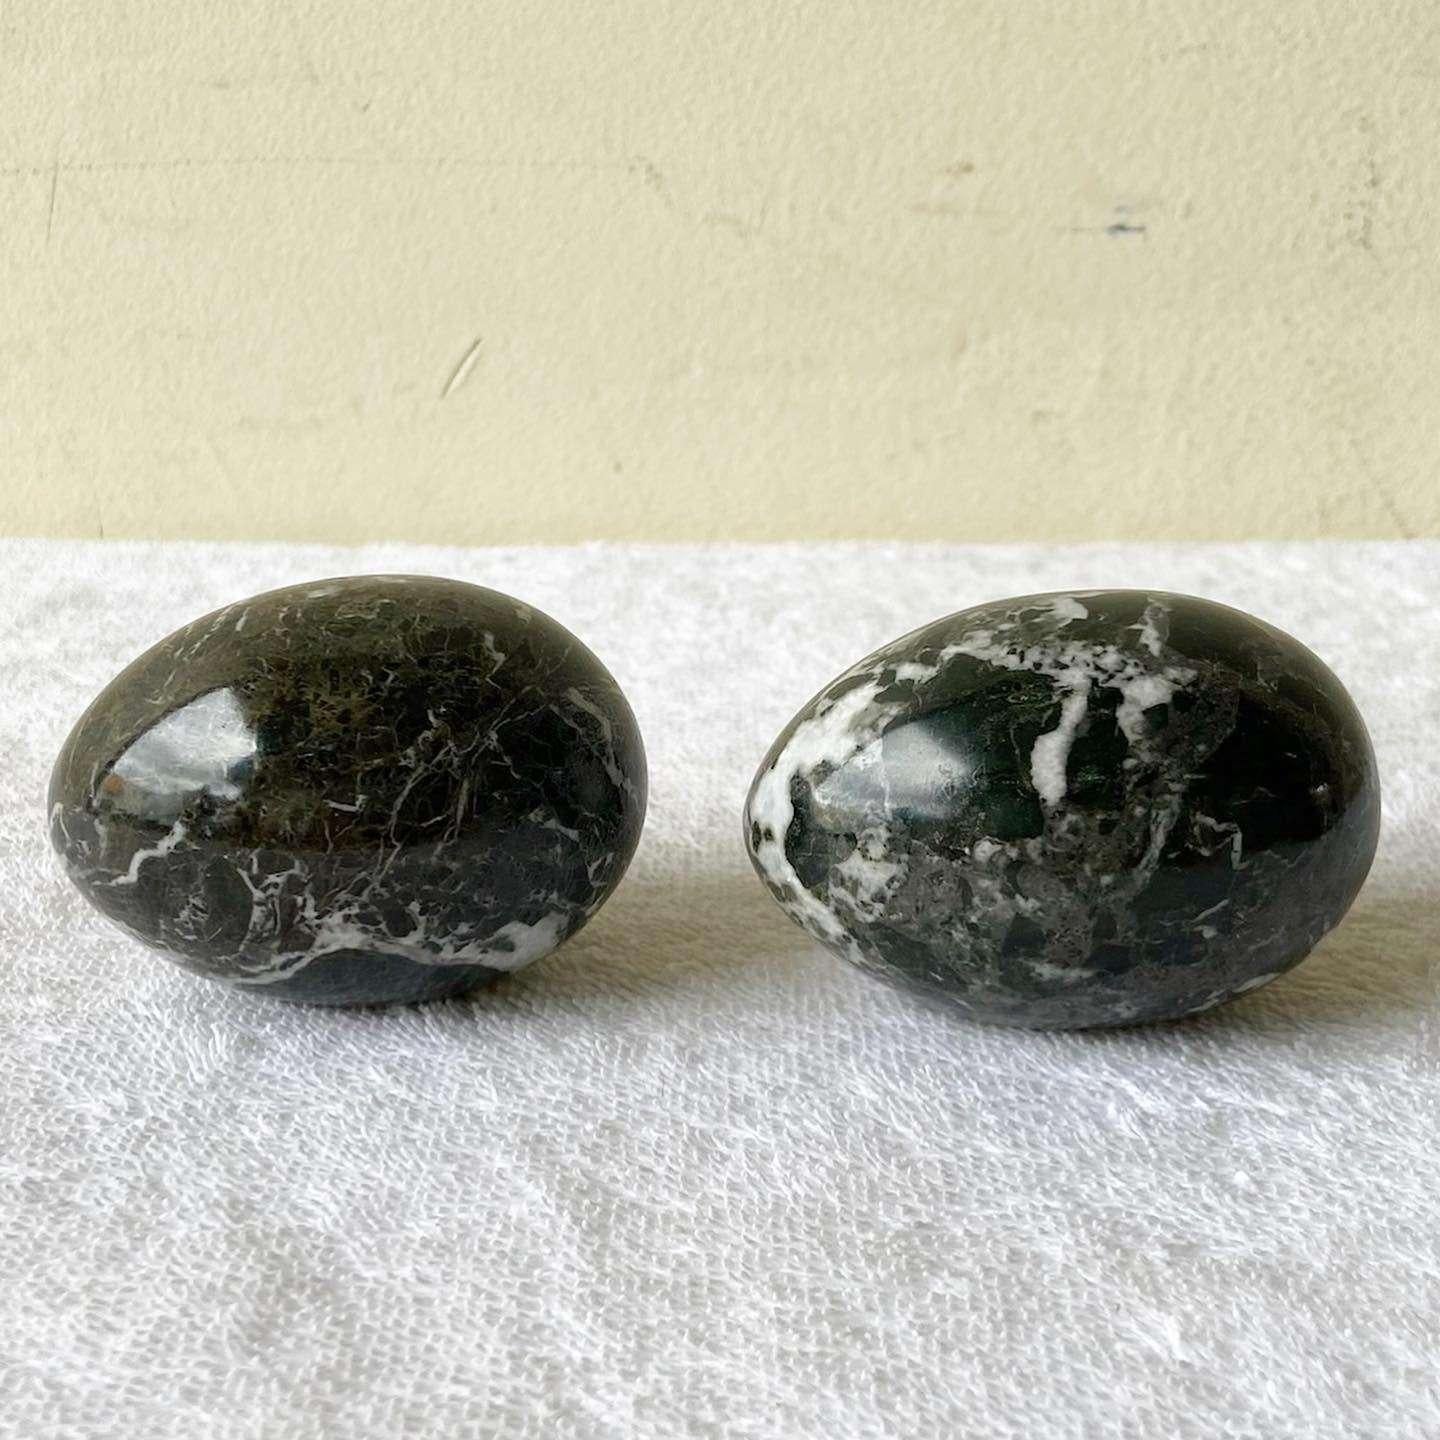 Exceptional, vintage pair of black marble paper weights. Each is polished and sculpted into the shape of an egg.
